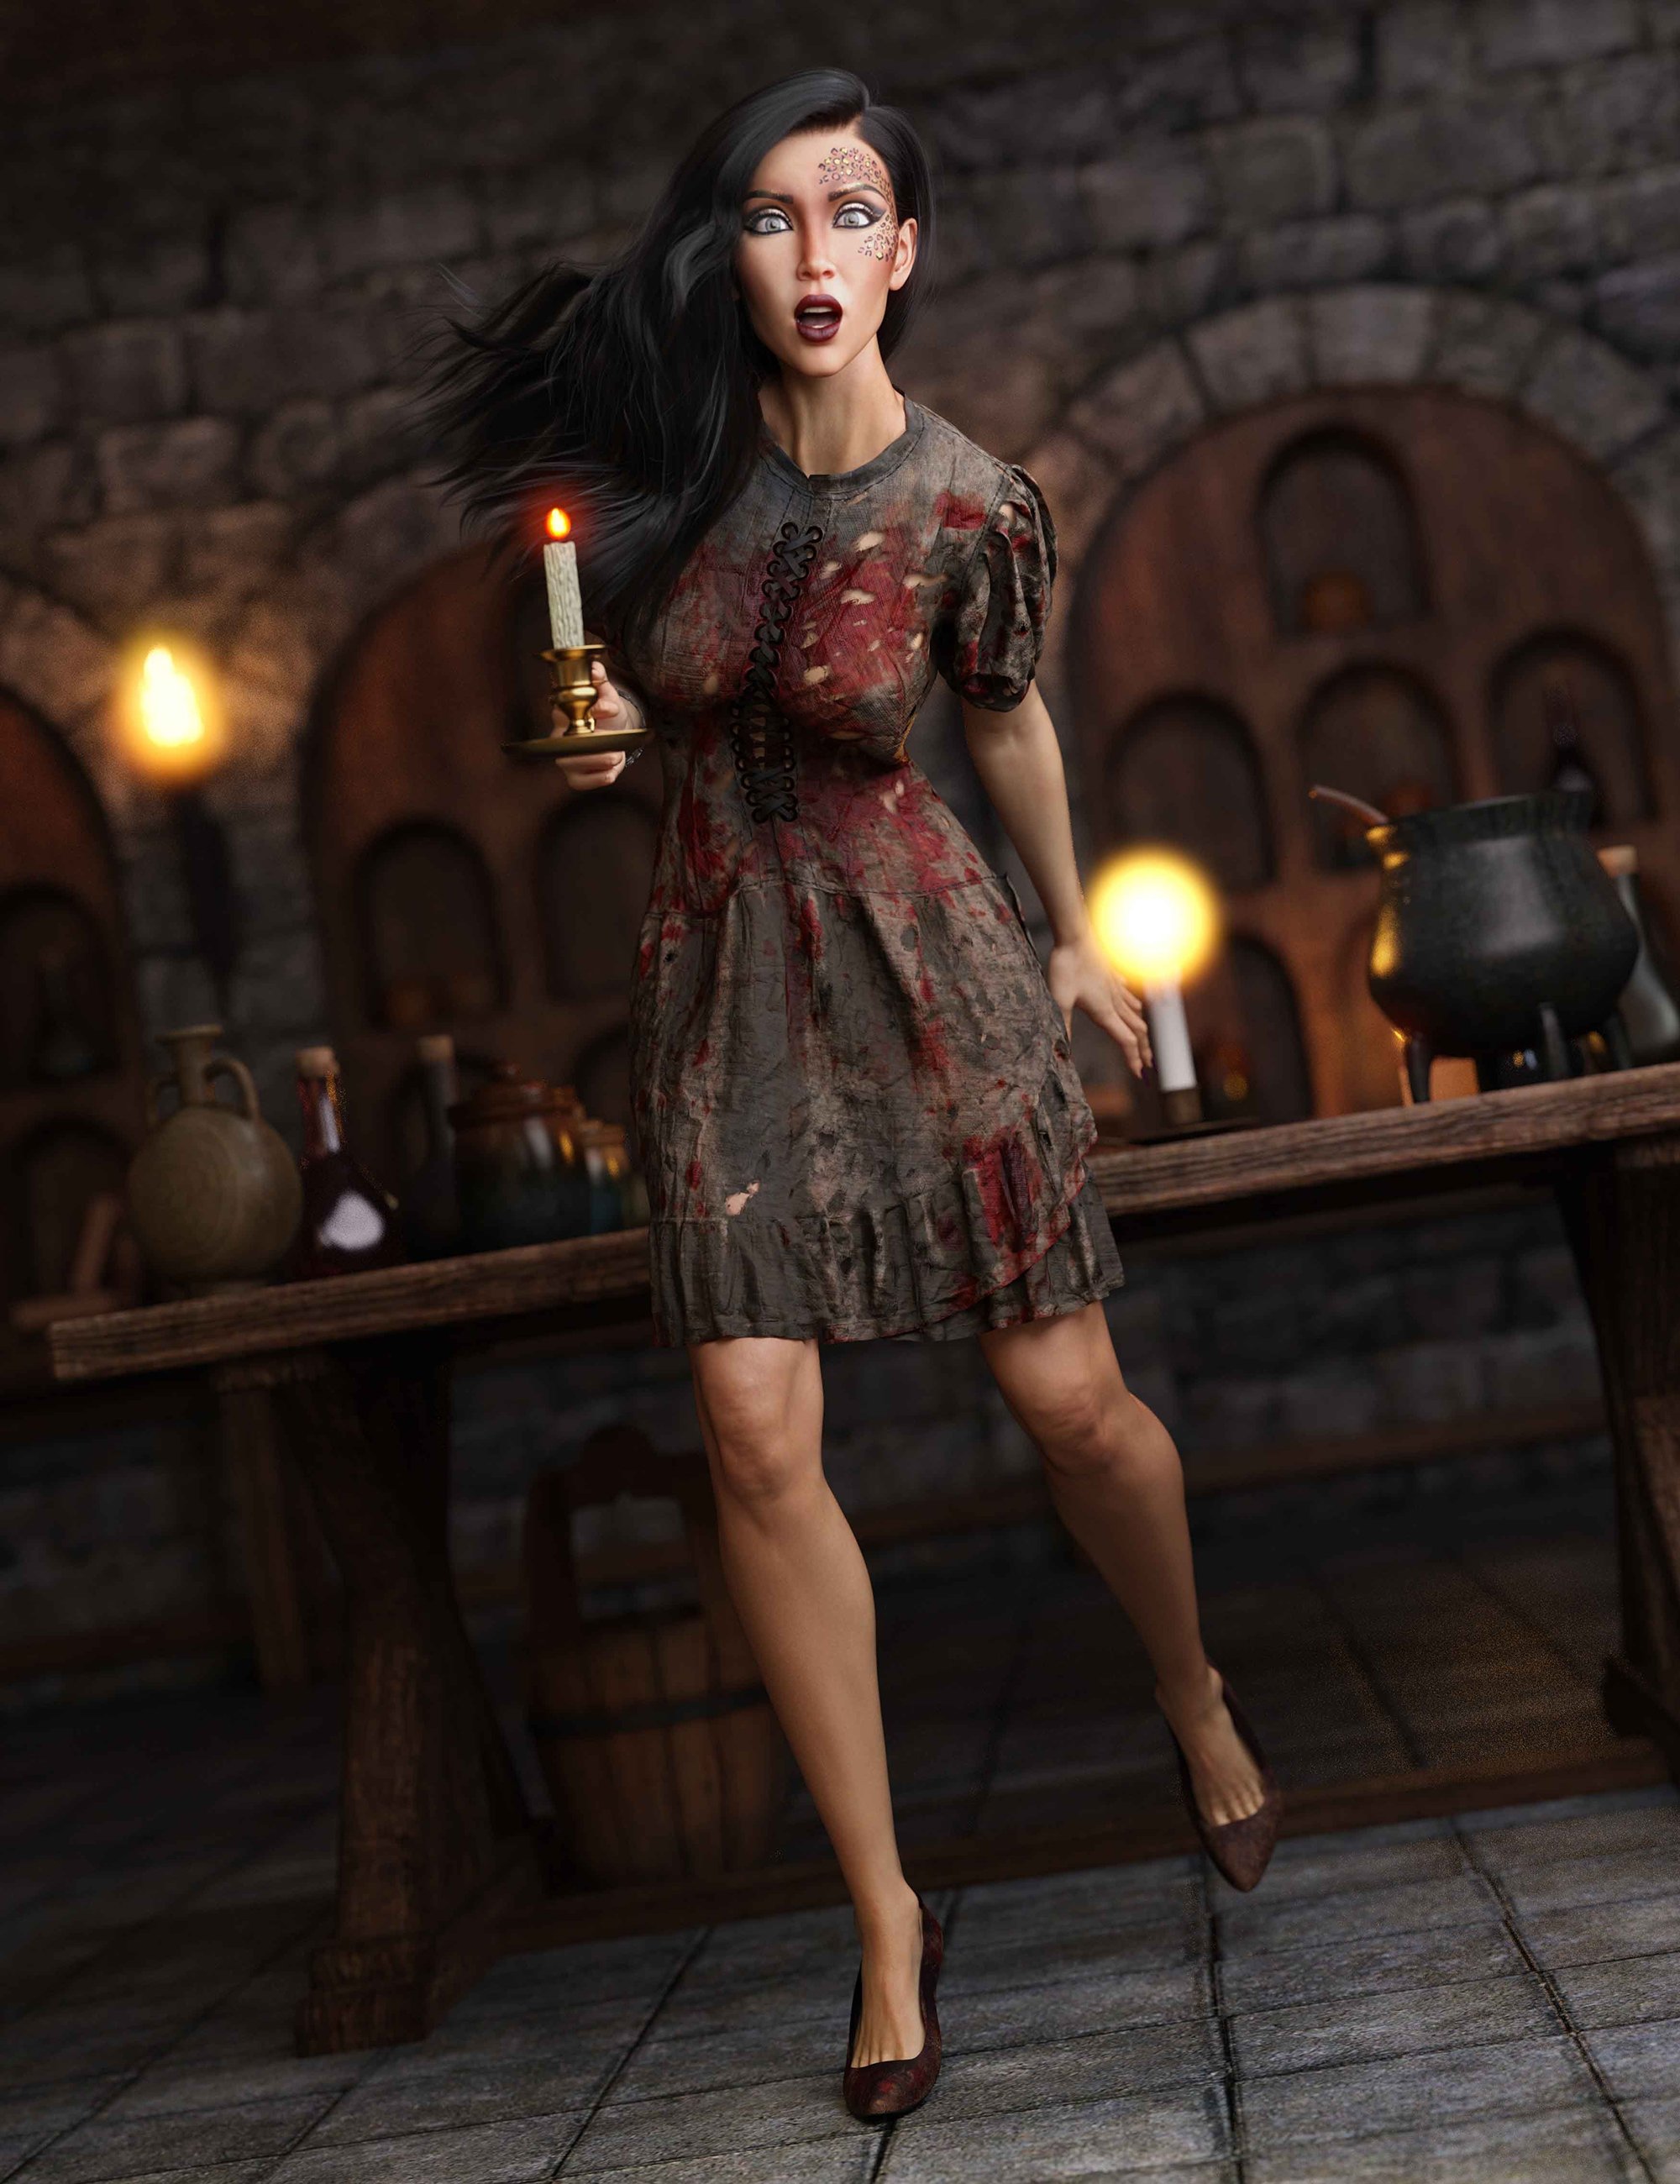 Versatility for Elianora Outfit by: Sade, 3D Models by Daz 3D